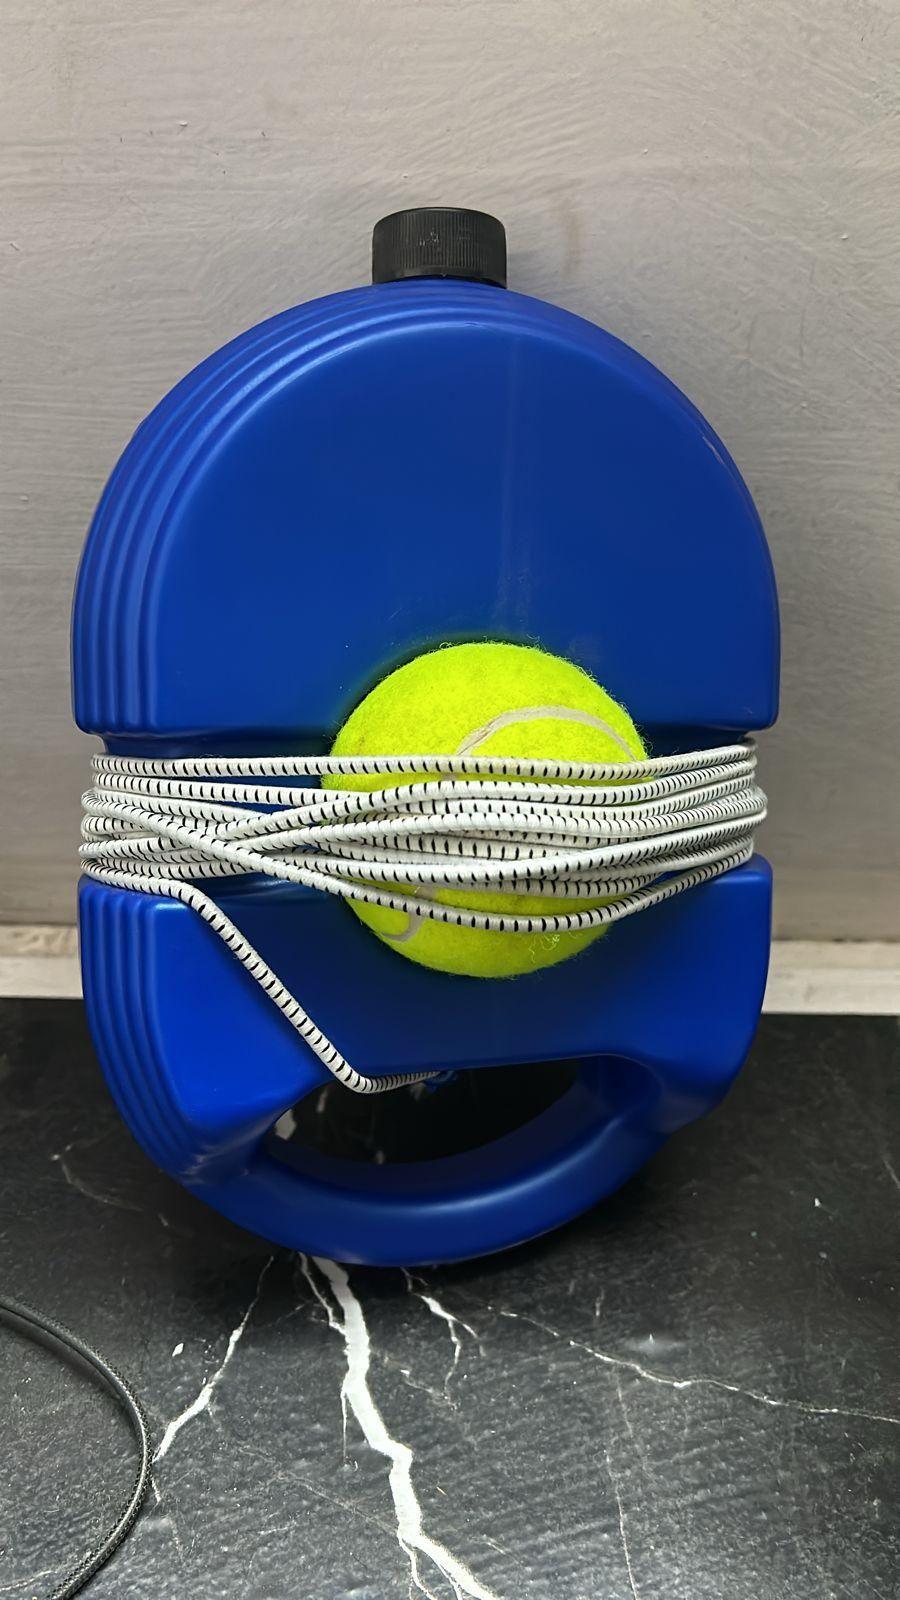 Solo Tennis Trainer Rebound Ball with String for Self Tennis Practice - Yellow life